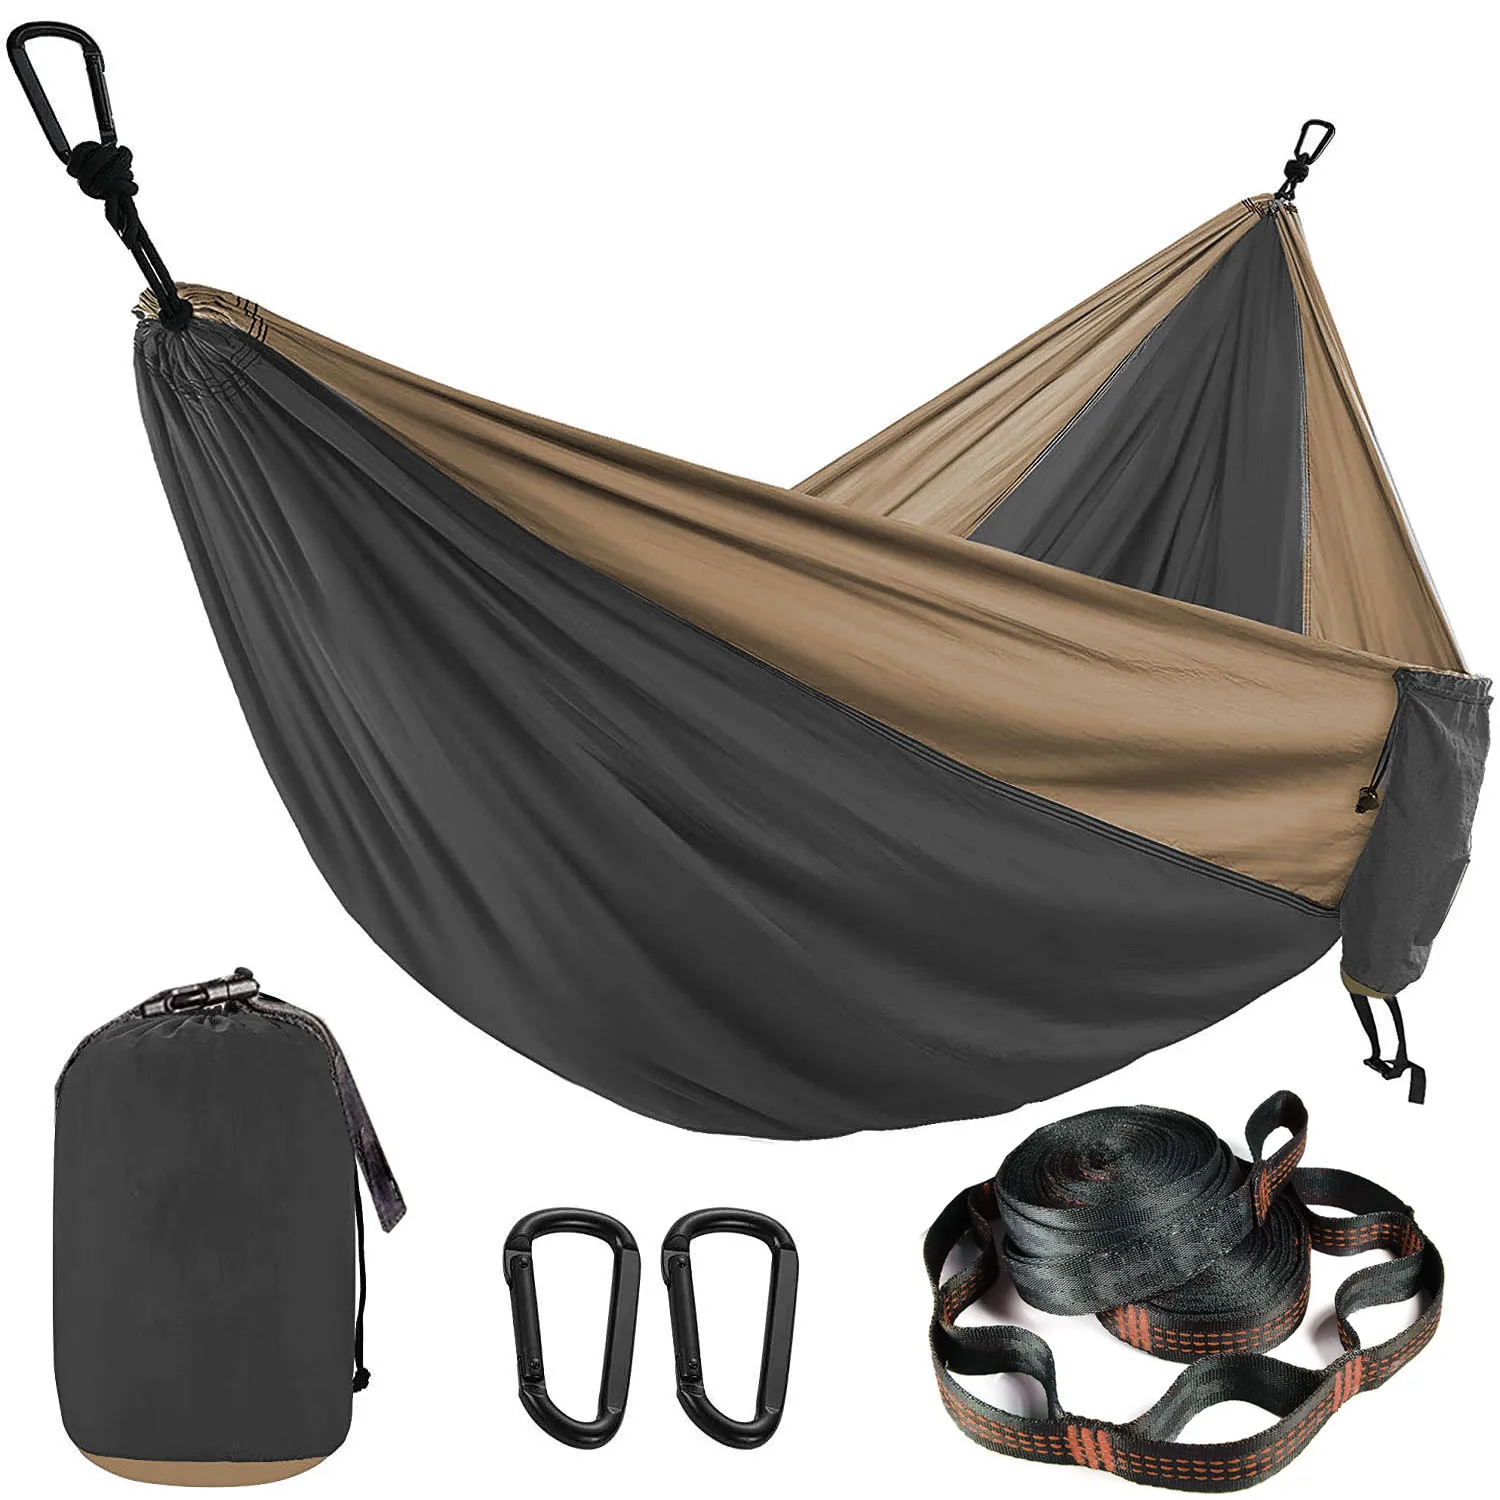 Parachute hammock with straps and black carabiner, camping, survival, travel, double person, outdoor furniture, swing chair